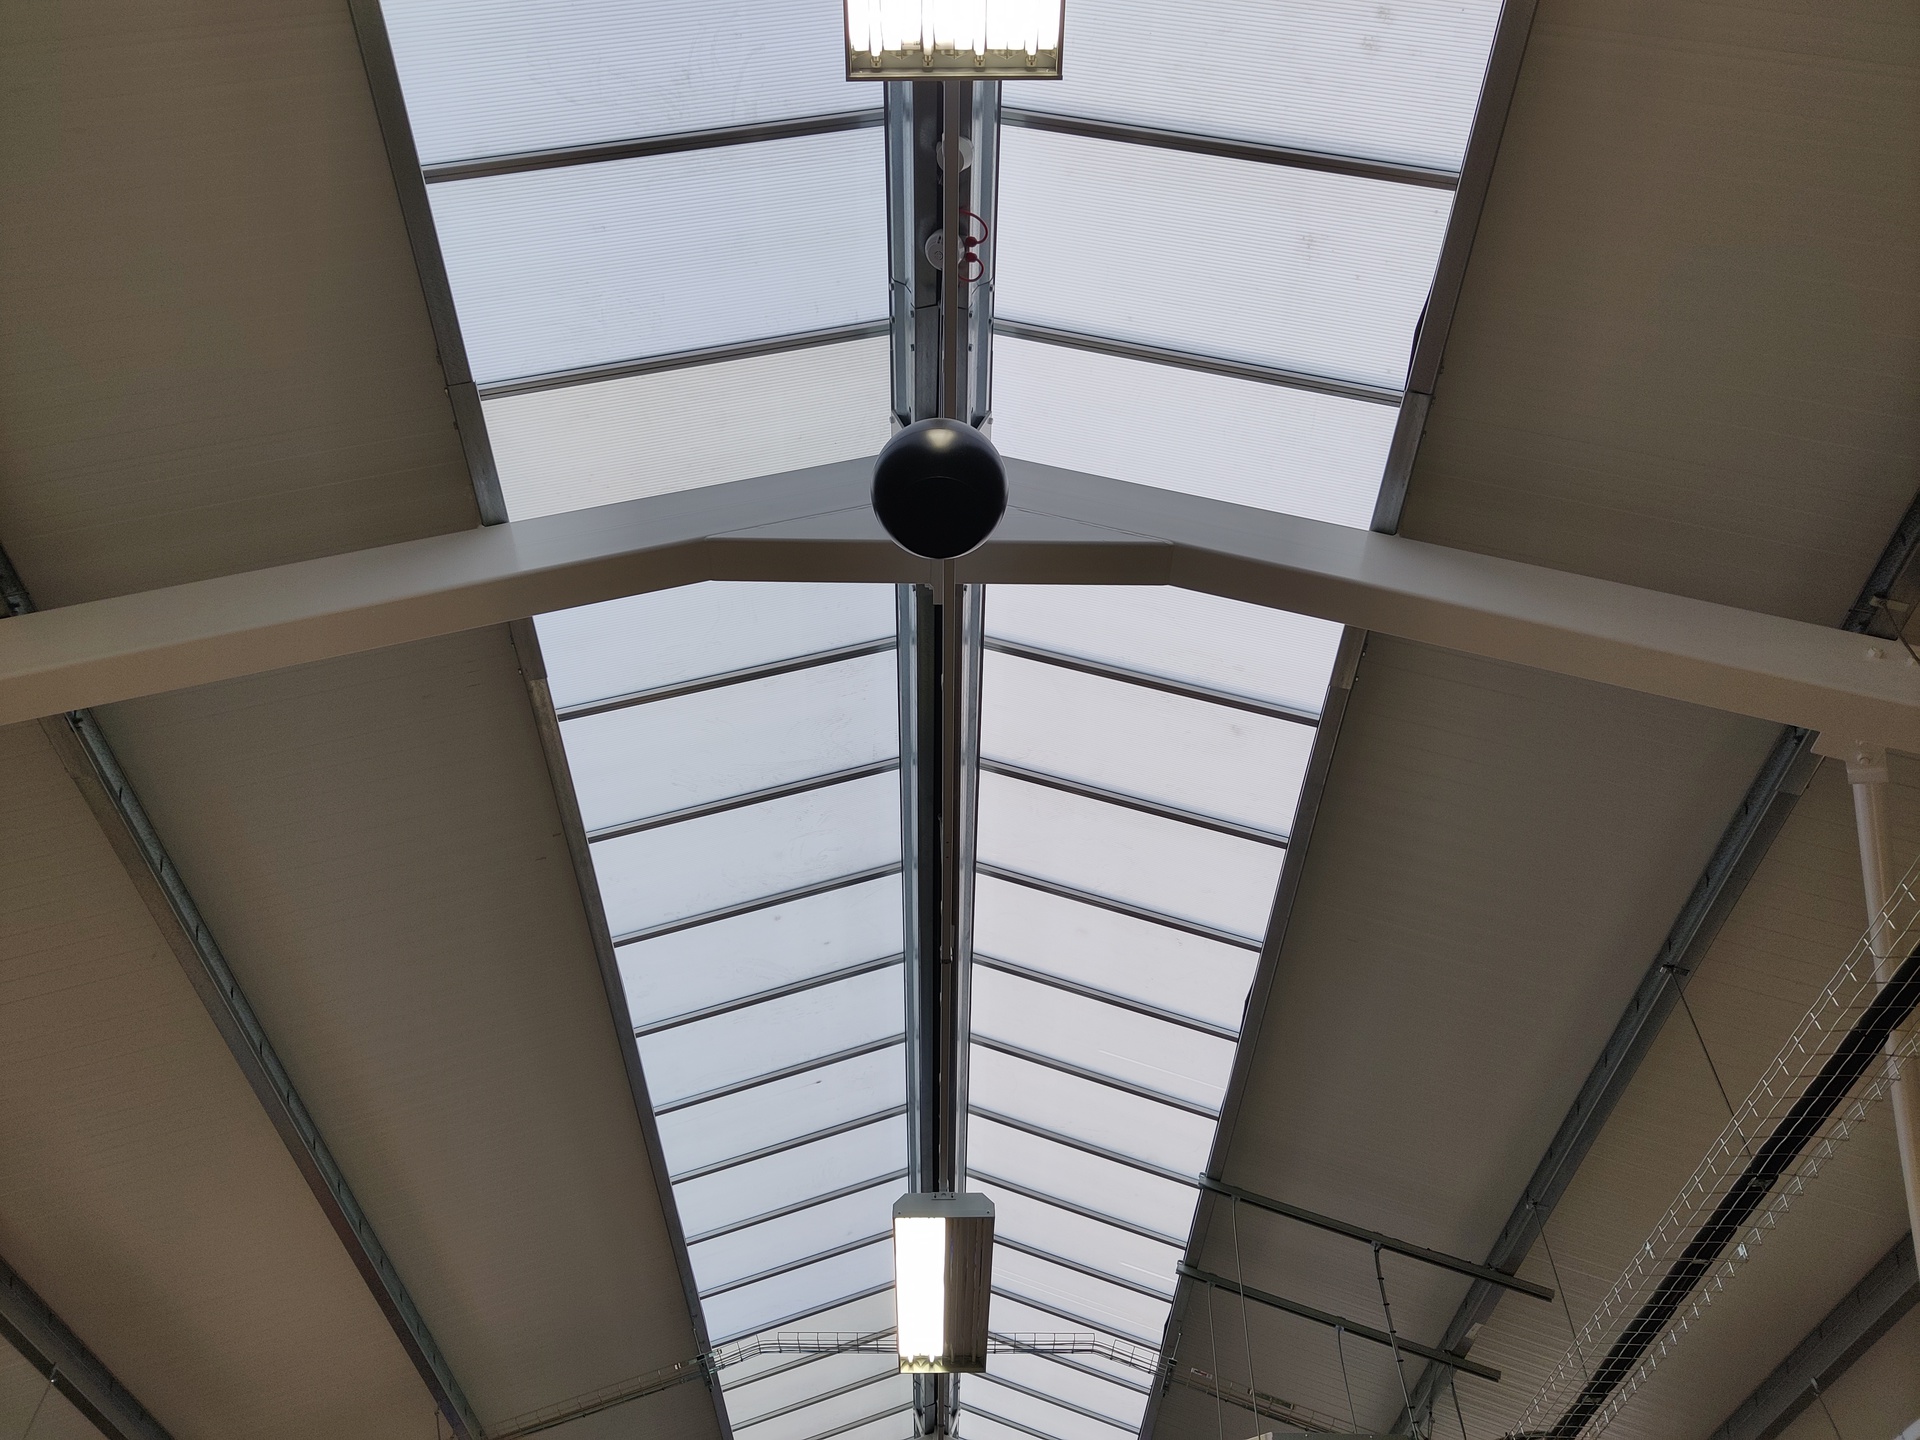 OnePlus 8T camera sample of a ceiling